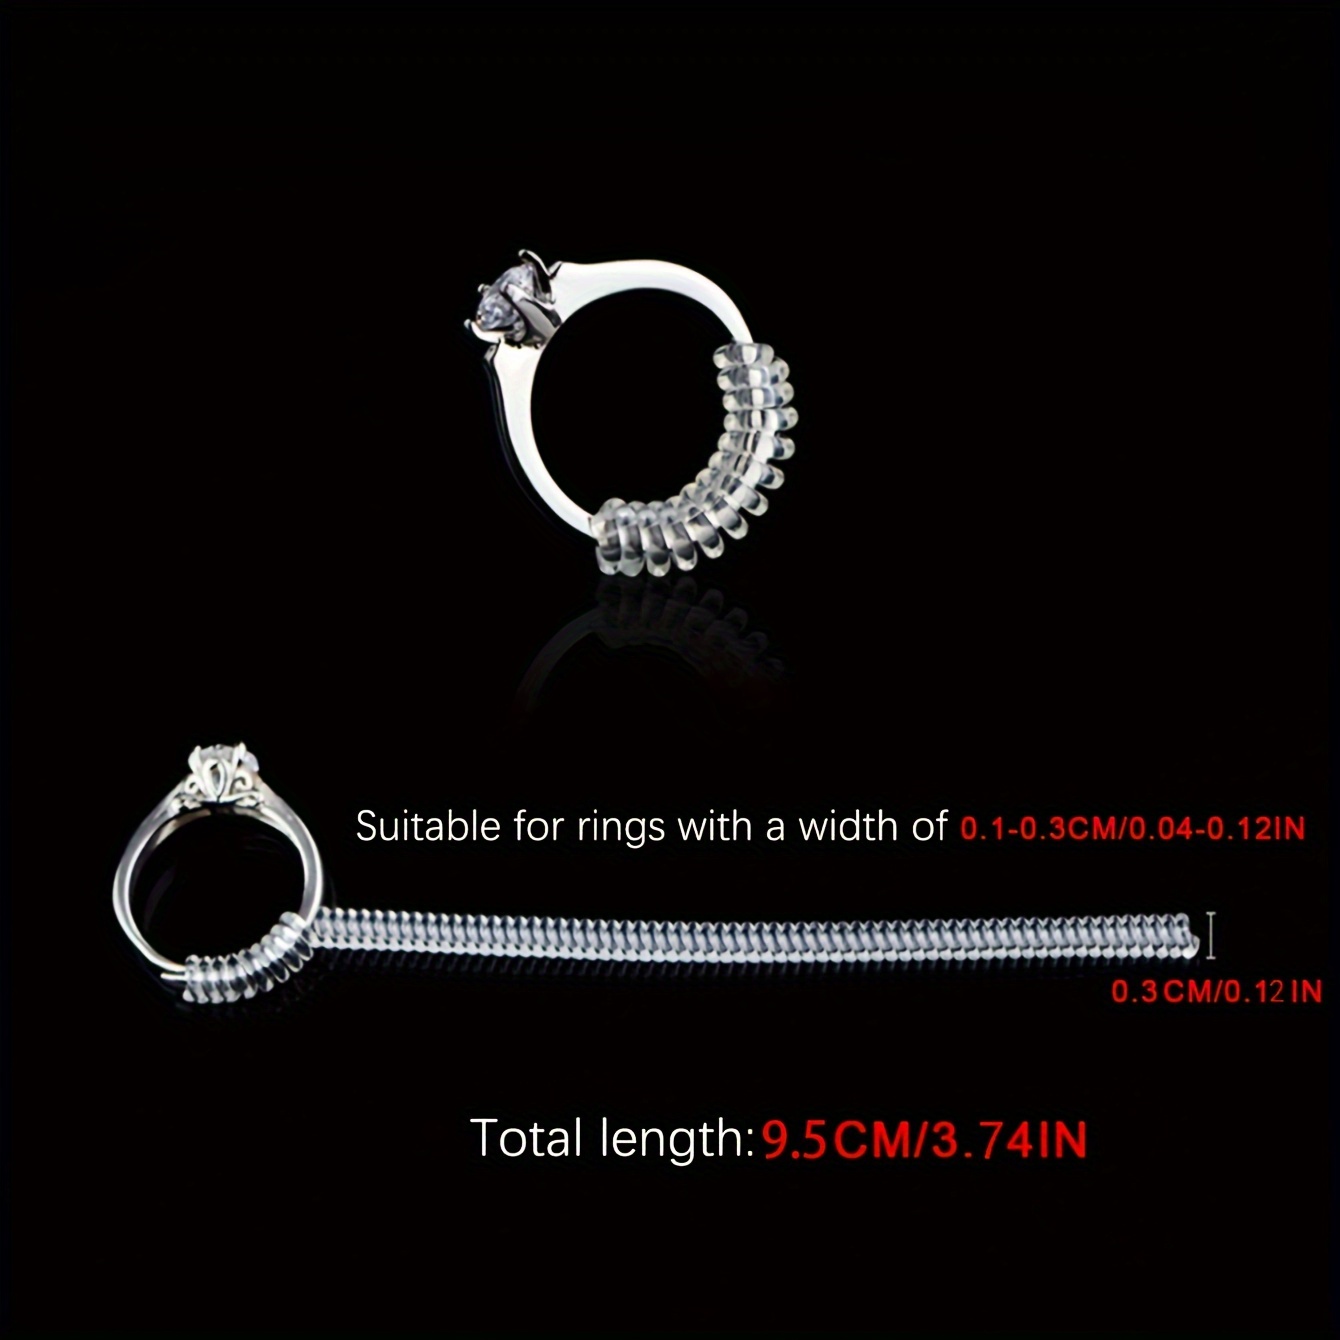 4Pcs Ring Size Adjusters for Loose Rings, 4Sizes Fitter, Spiral Silicone  Tightener Set Fit Almost Any Size Rings